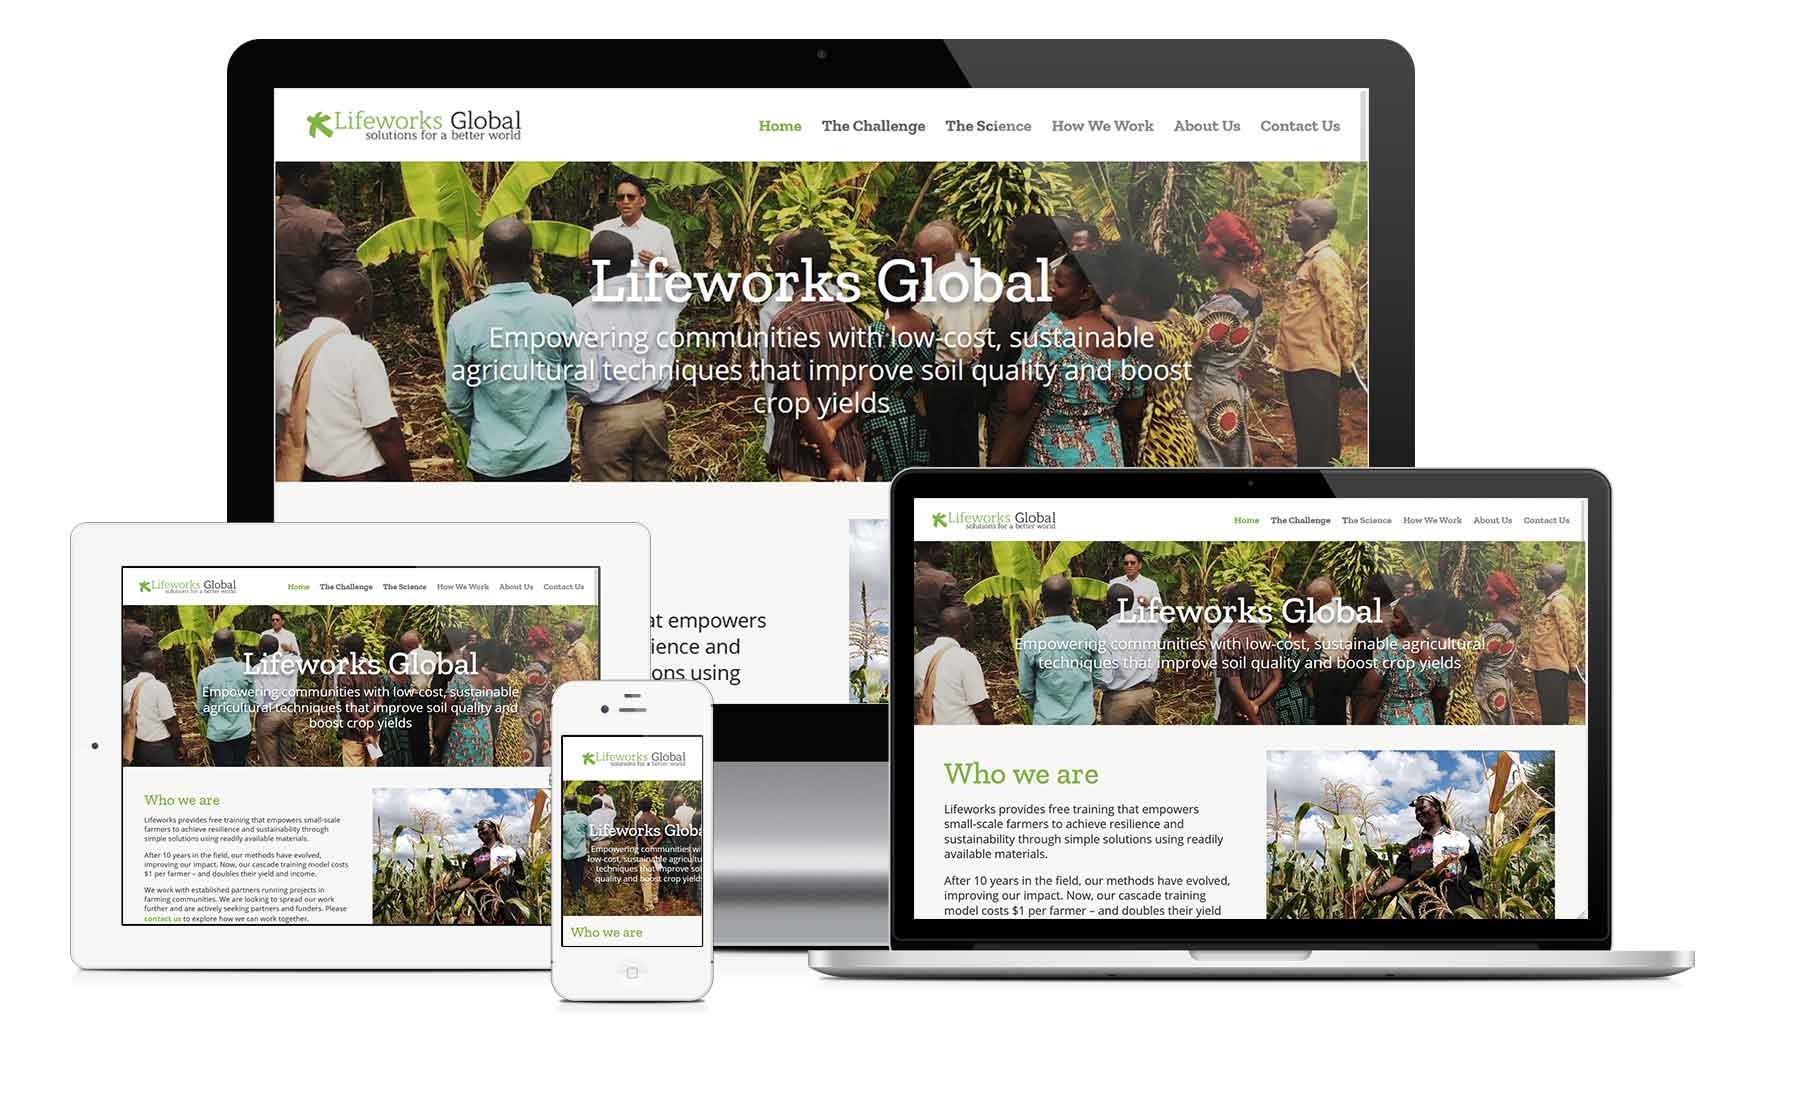 Lifeworks Global website as seen on different devices